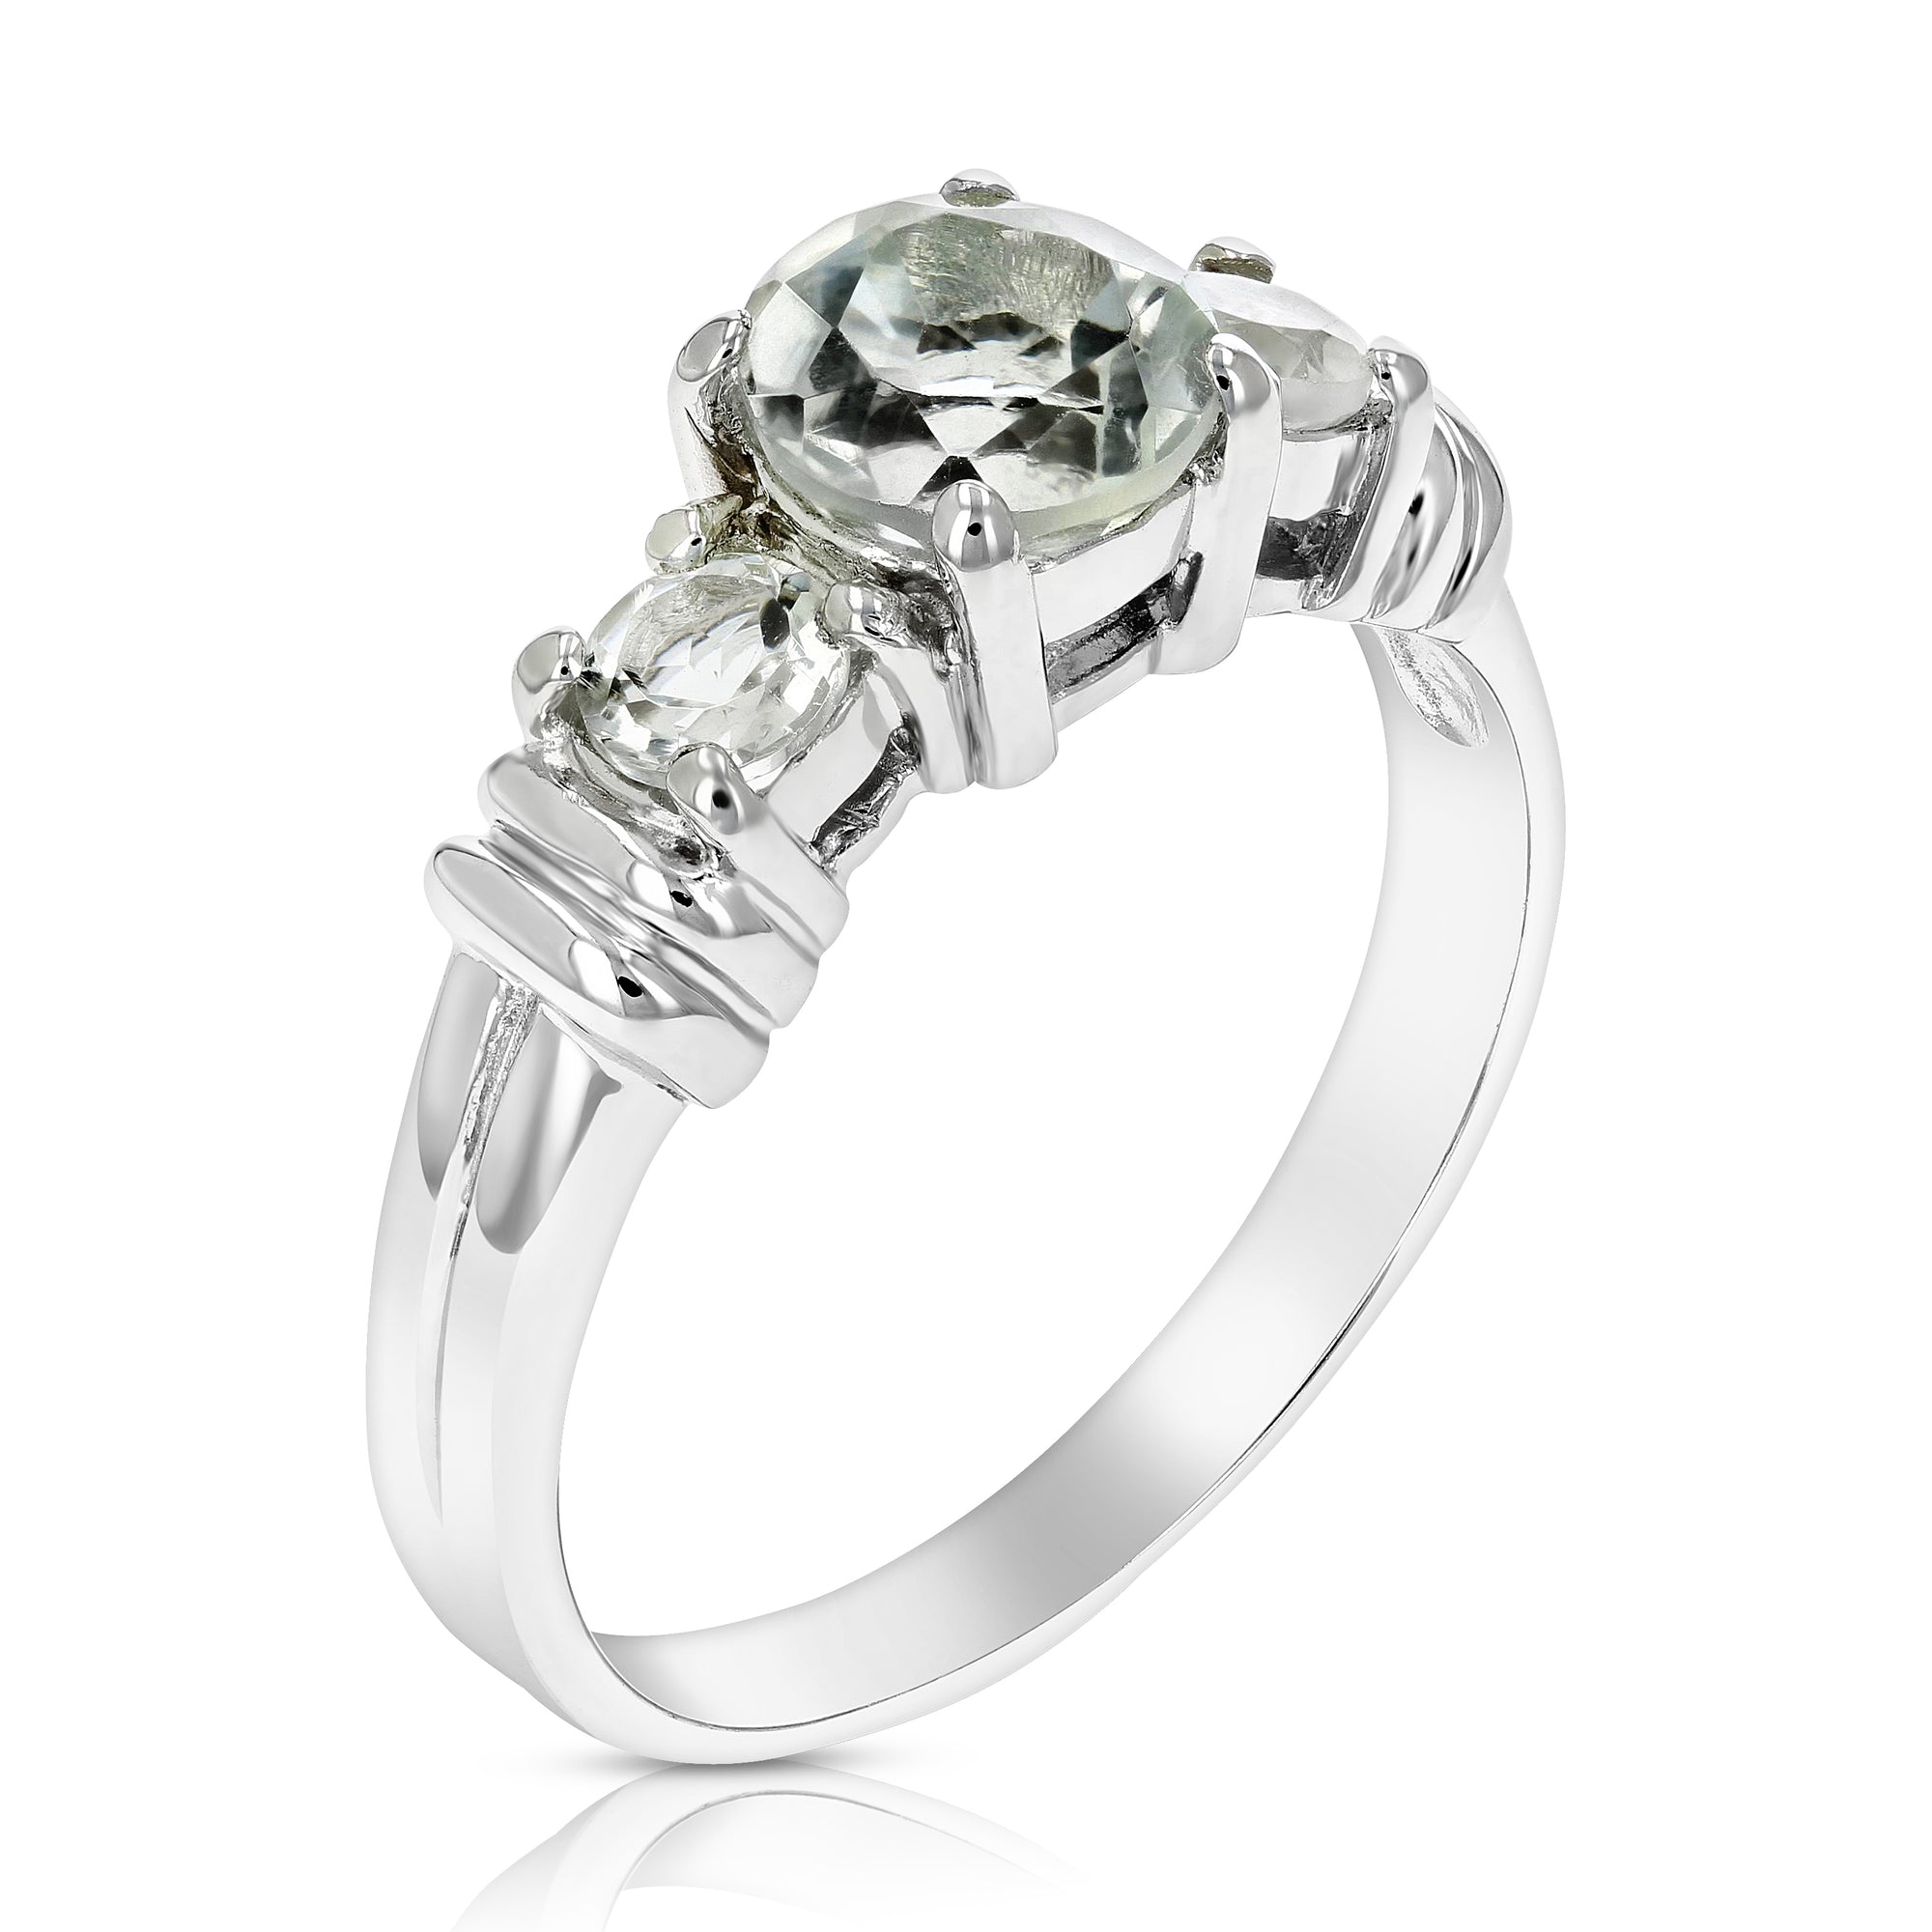 1.70 cttw 3 Stone Green Amethyst Ring in .925 Sterling Silver with Rhodium Round